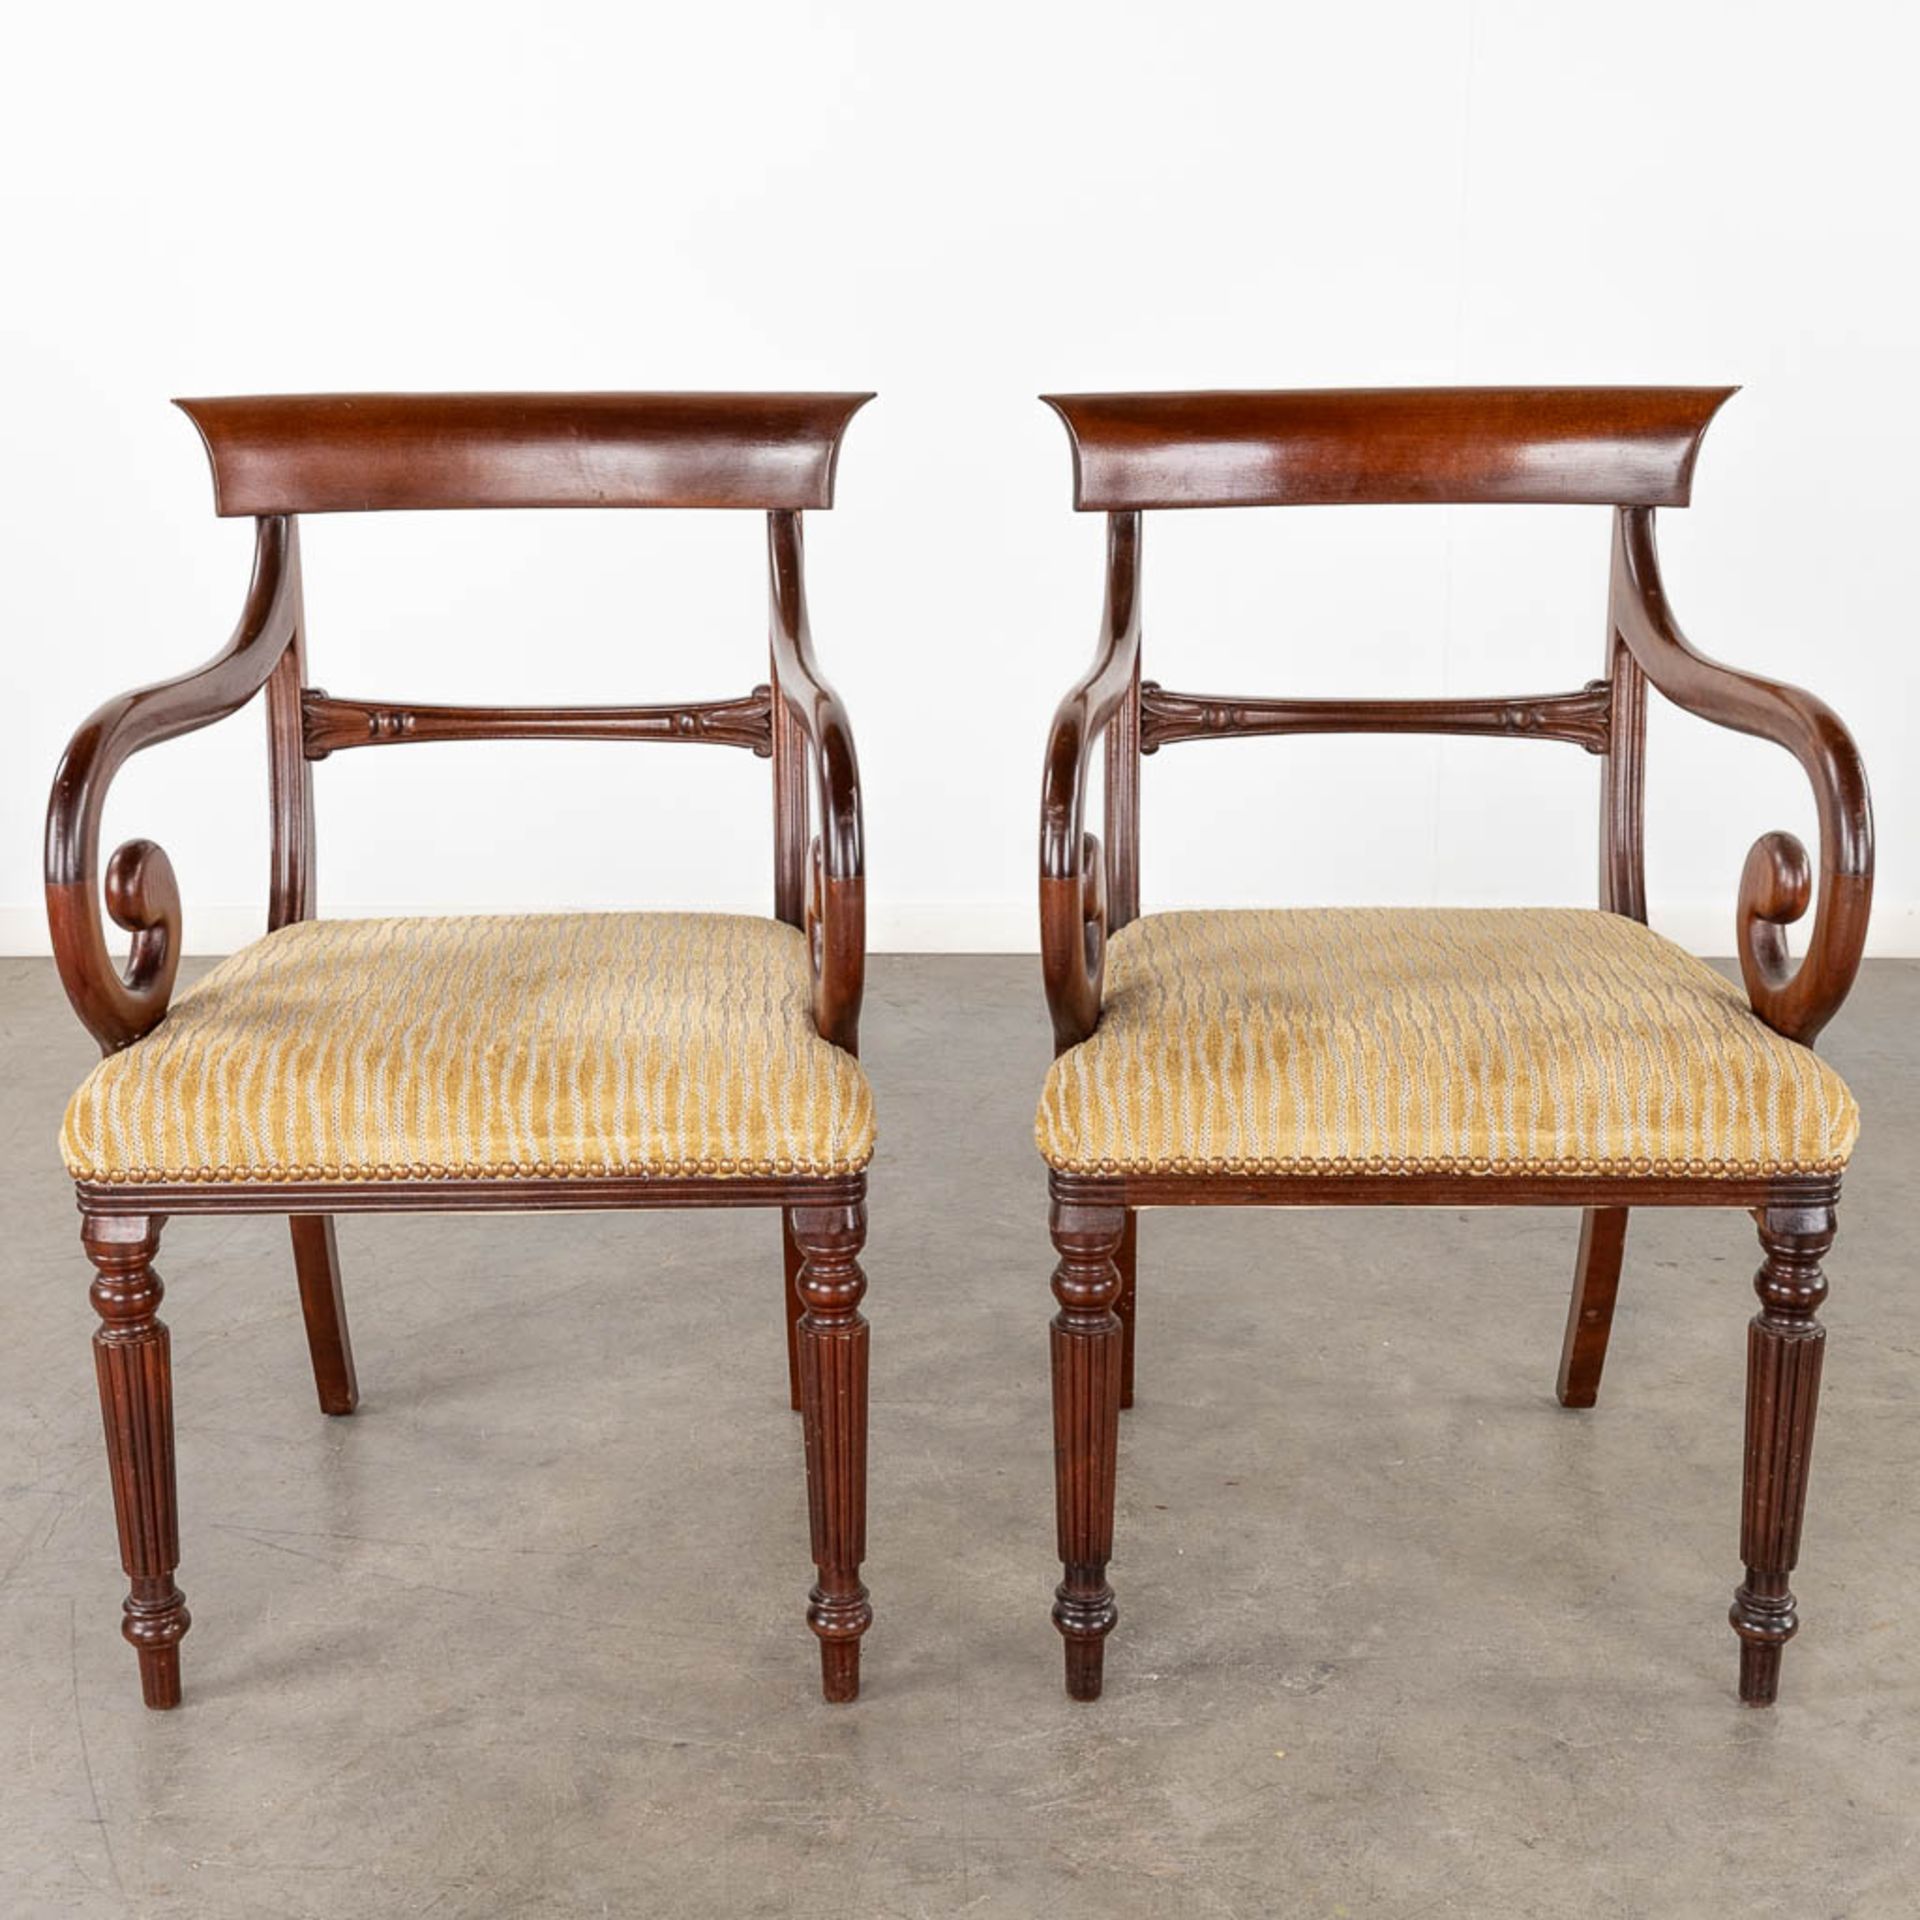 An extendible table, 6 chairs and two armchairs, Mahogany. England. 20th C. (D:144 x W:144 x H:75 cm - Image 12 of 22